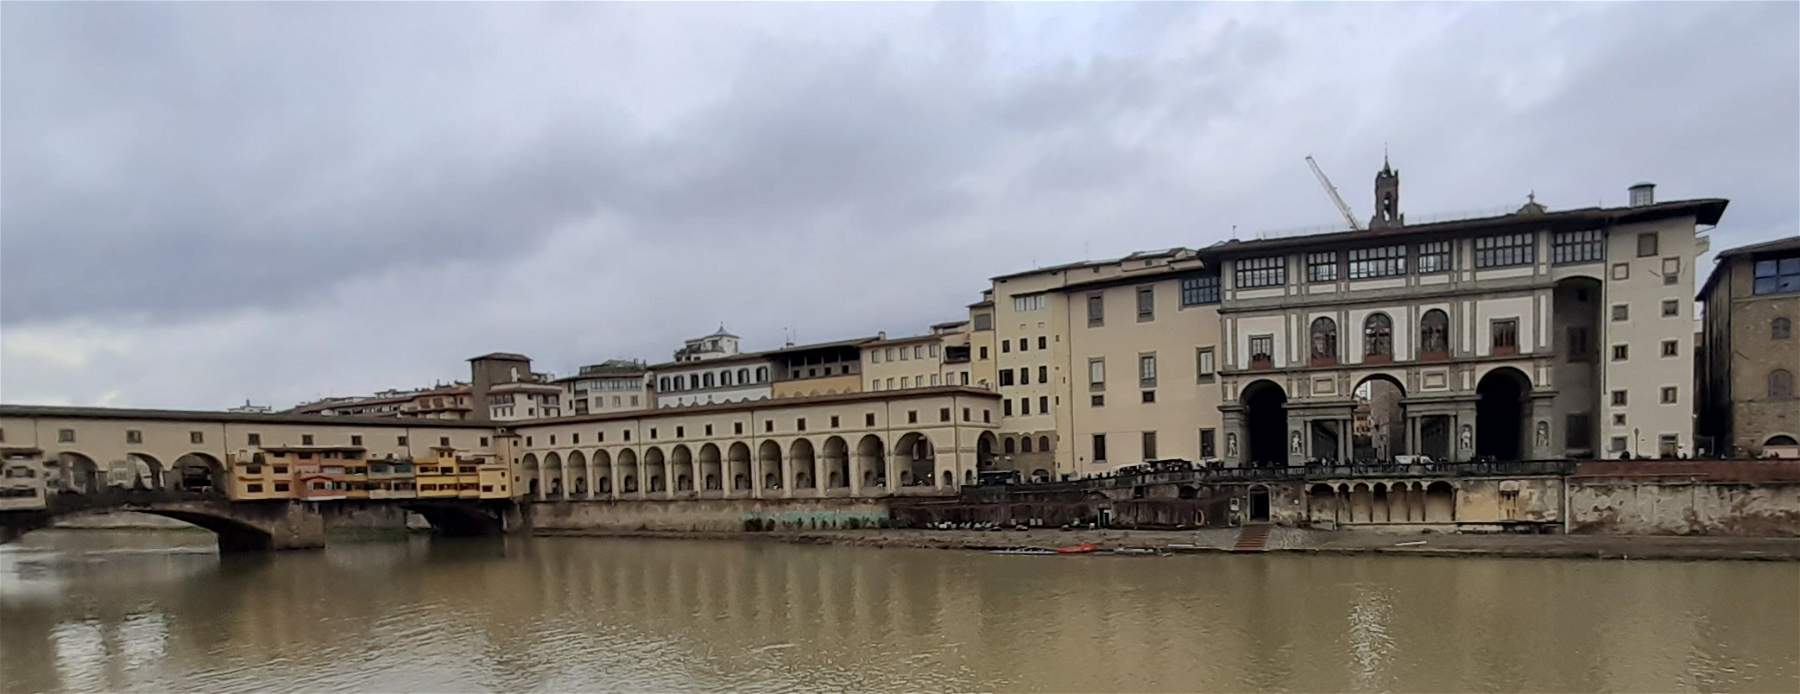 Florence, restoration of the Vasariana Terrace begins